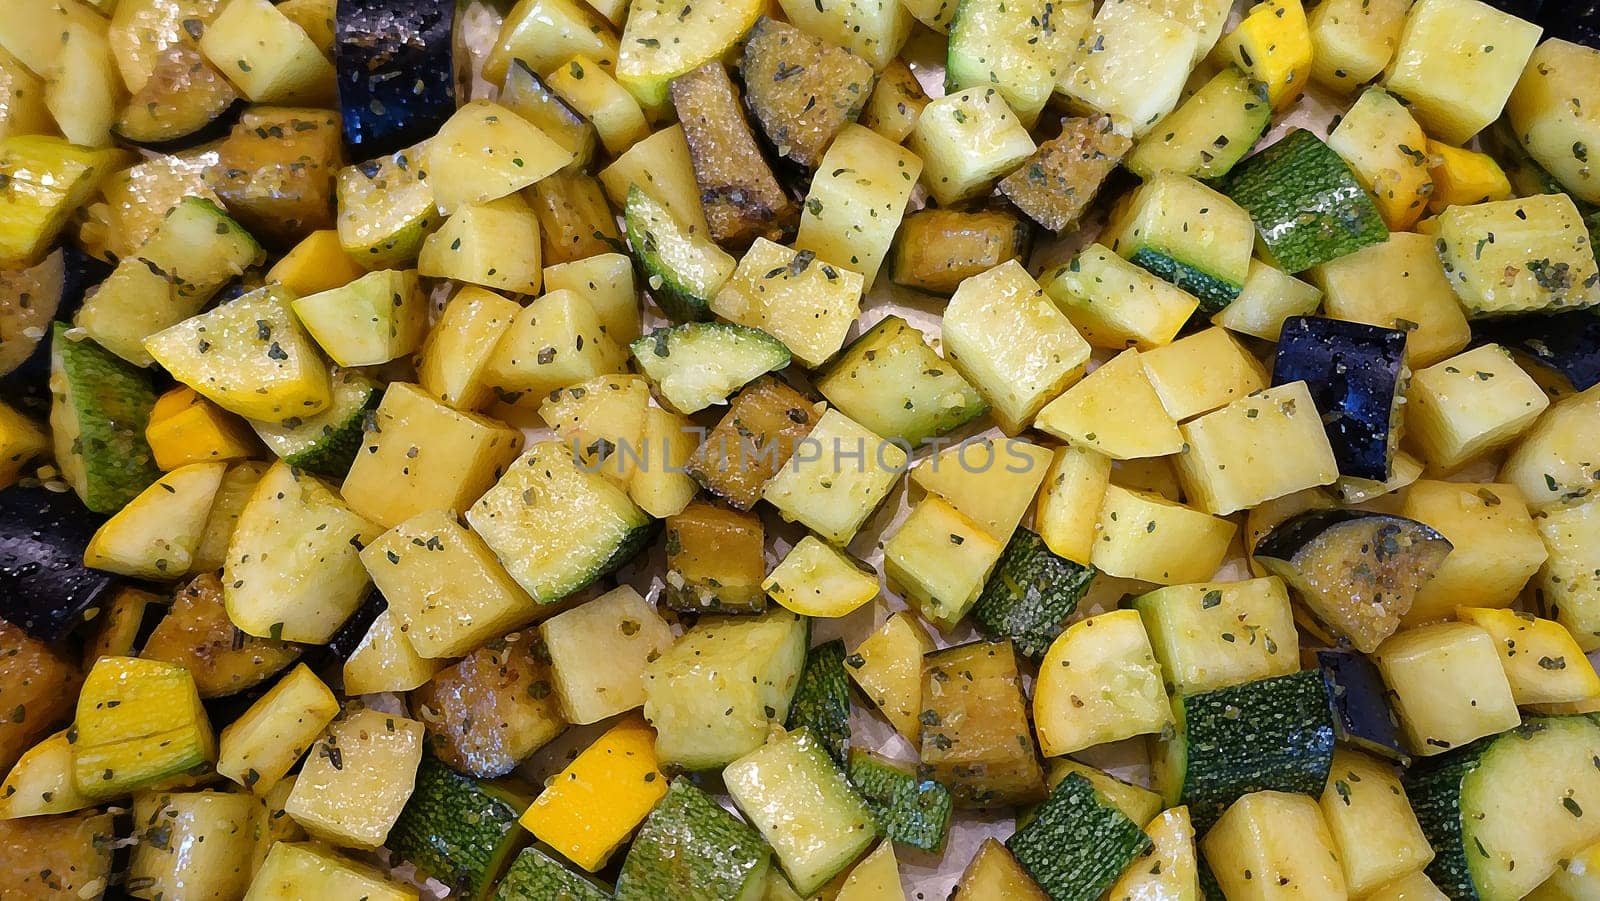 The eggplant and zucchini are diced, spiced and ready to go in the oven.